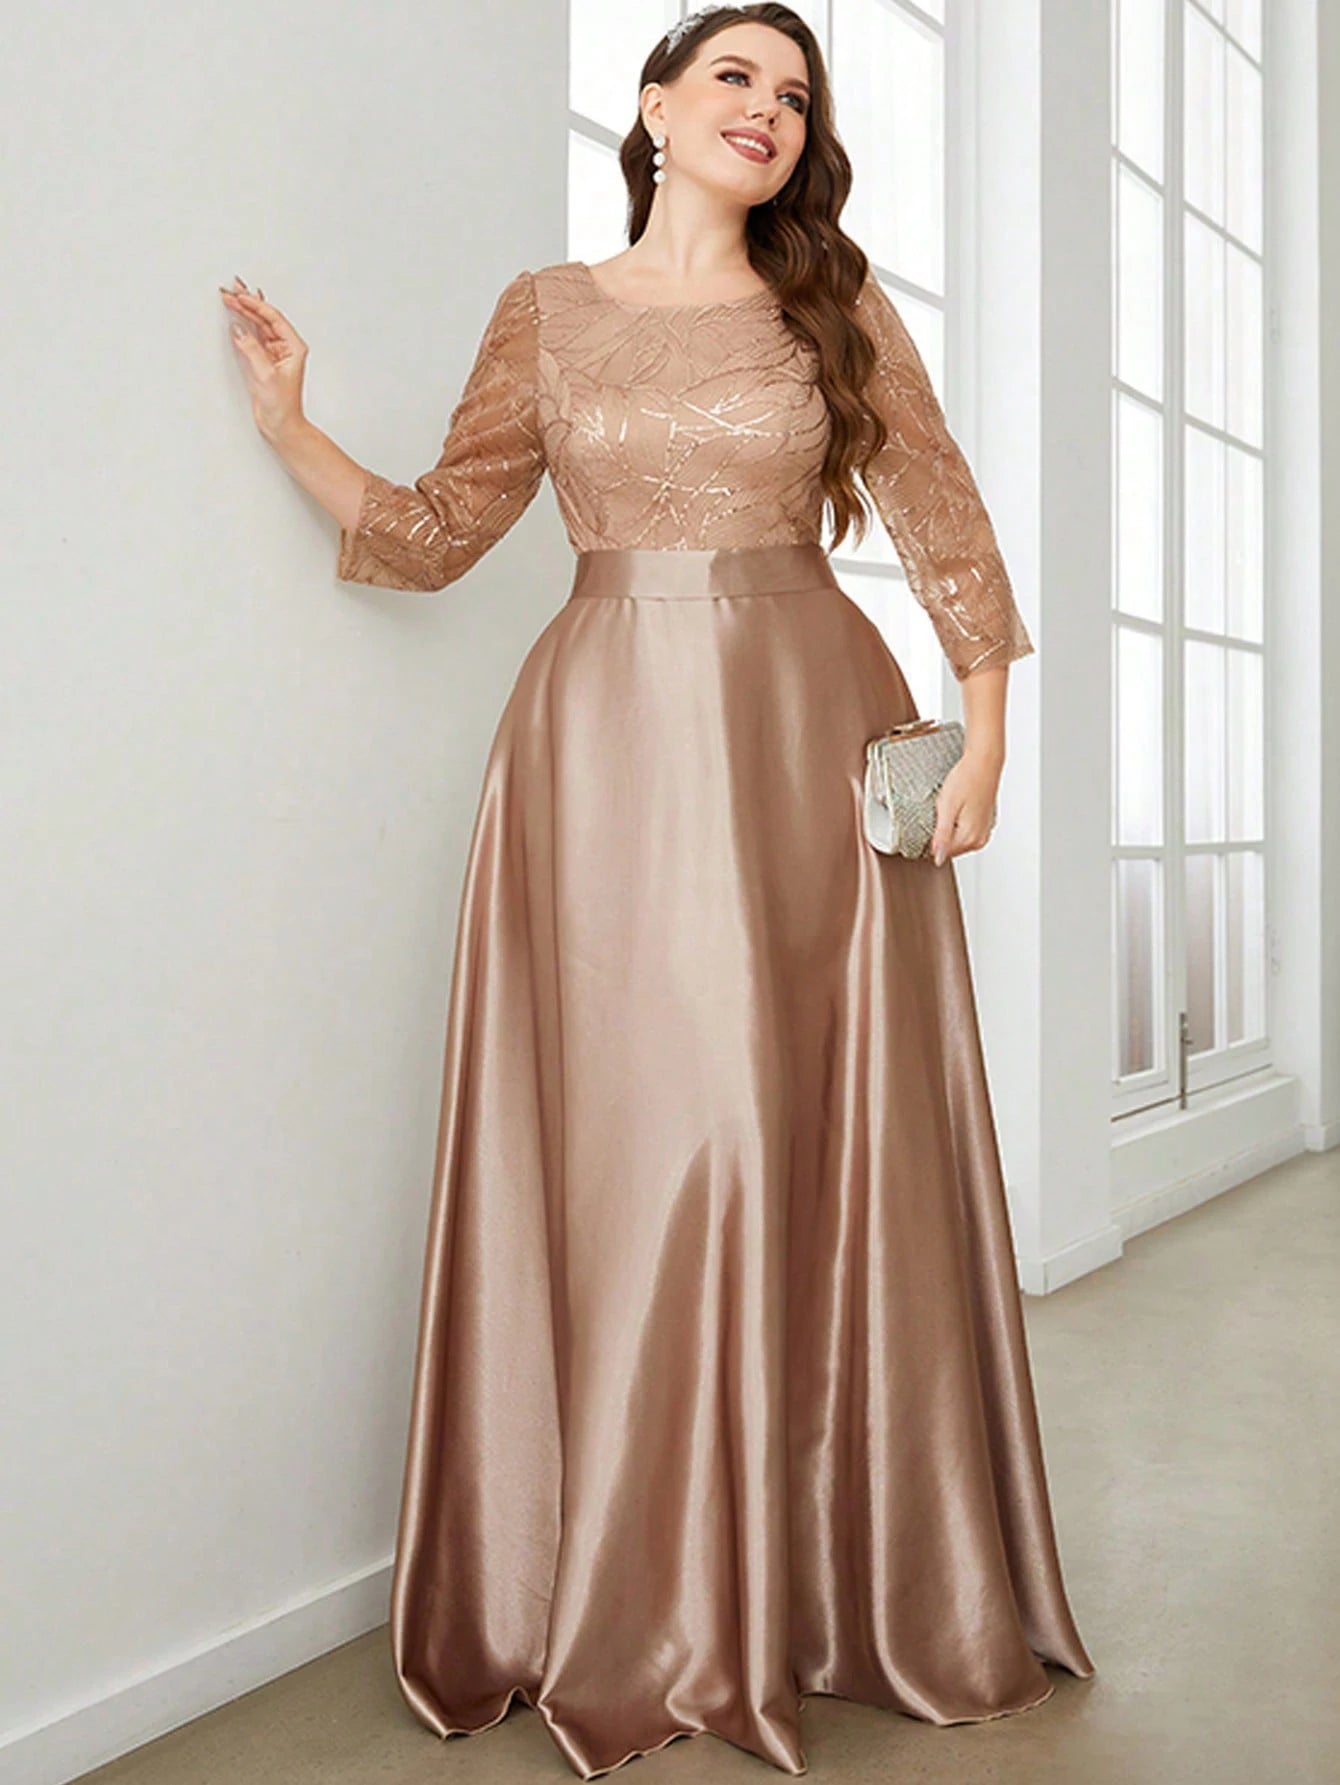 Mgiacy Crew neck long sleeve sequin patchwork satin long gown ball dress Party dress Bridesmaid dress